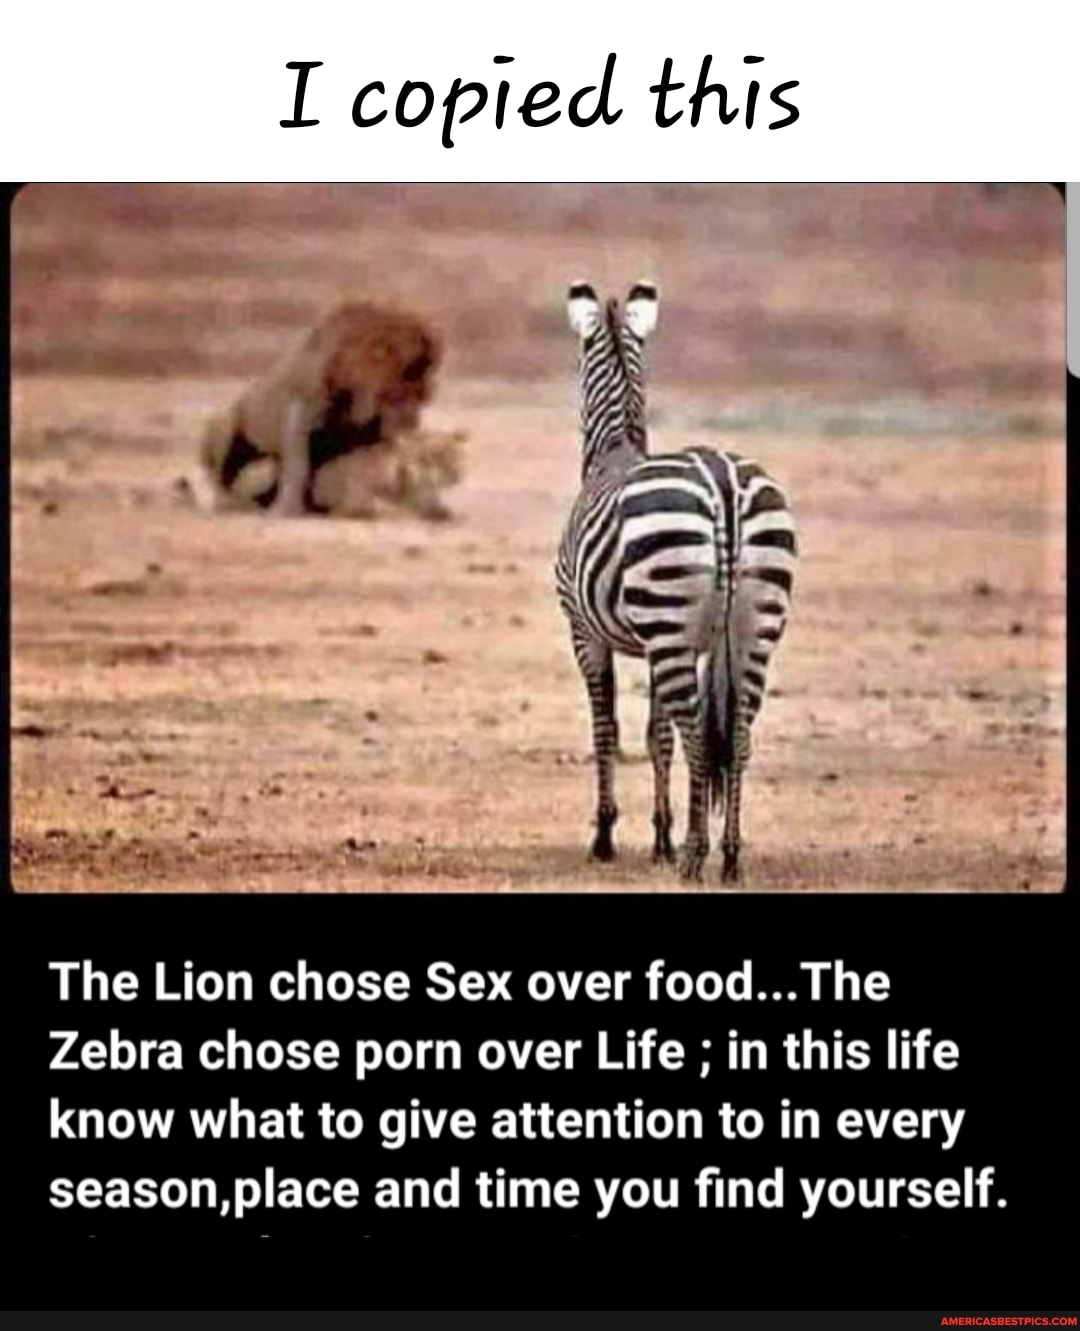 Zibr Sex - Copied this The Lion chose Sex over food... The Zebra chose porn over Life  in this life know what to give attention to in every season,place and time  you find yourself. -